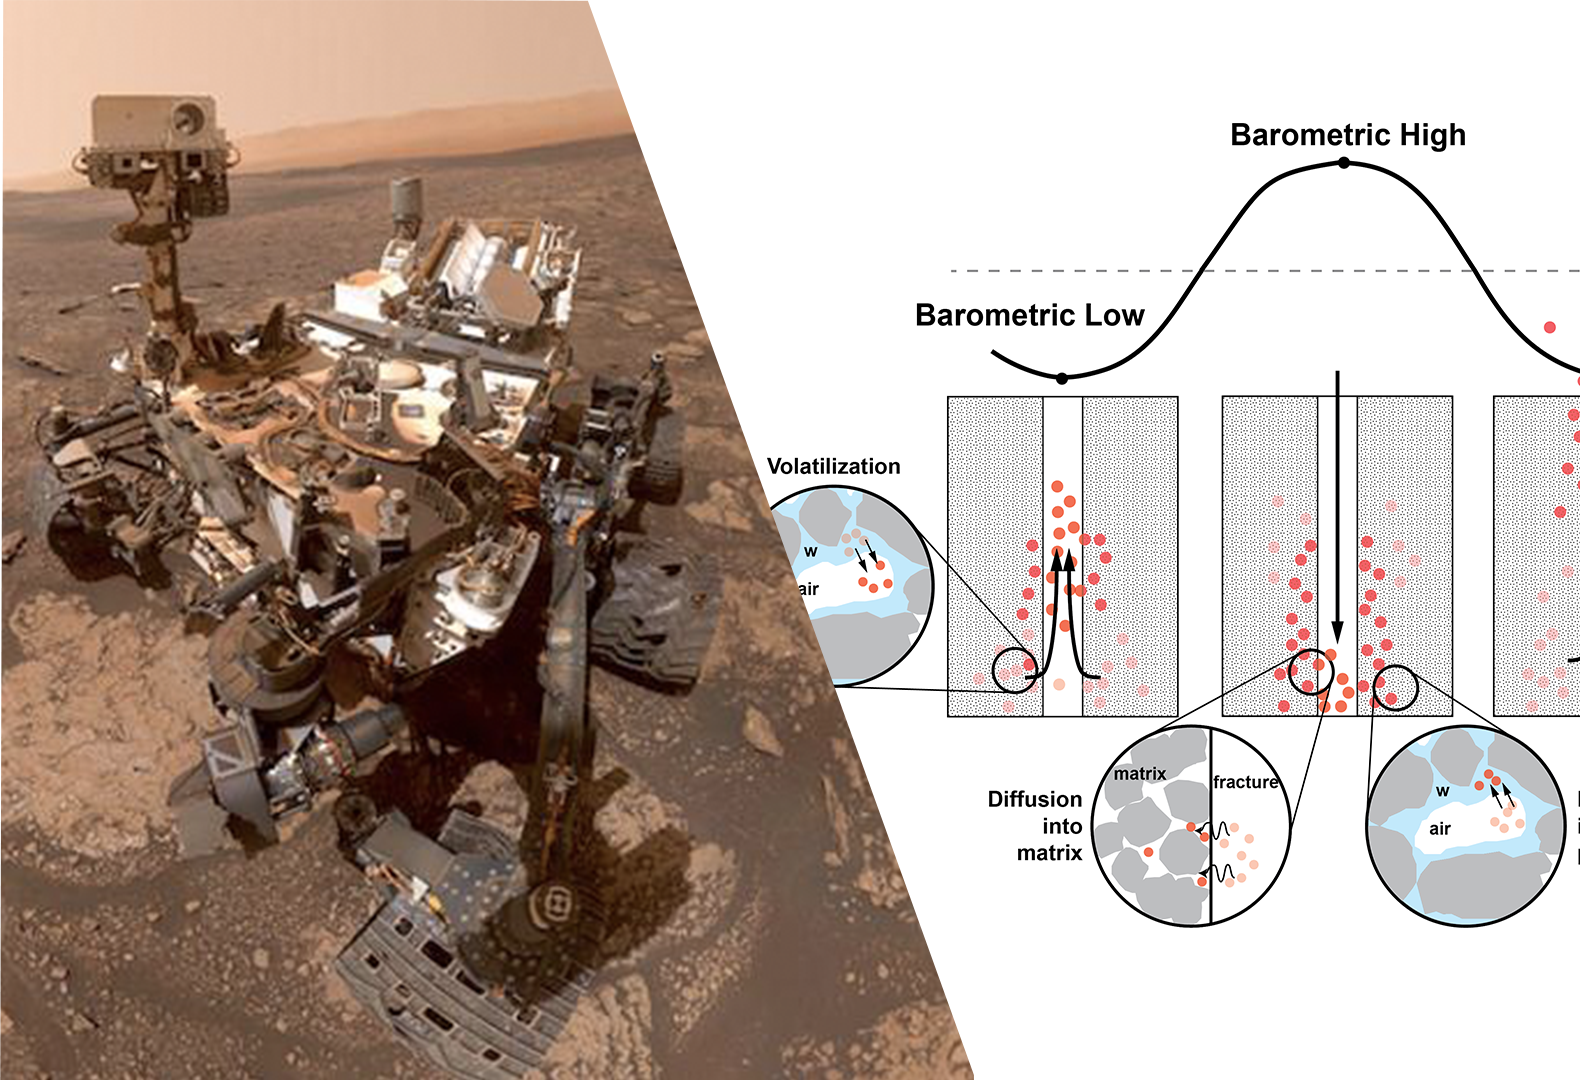 So Mars pumps methane into the atmosphere